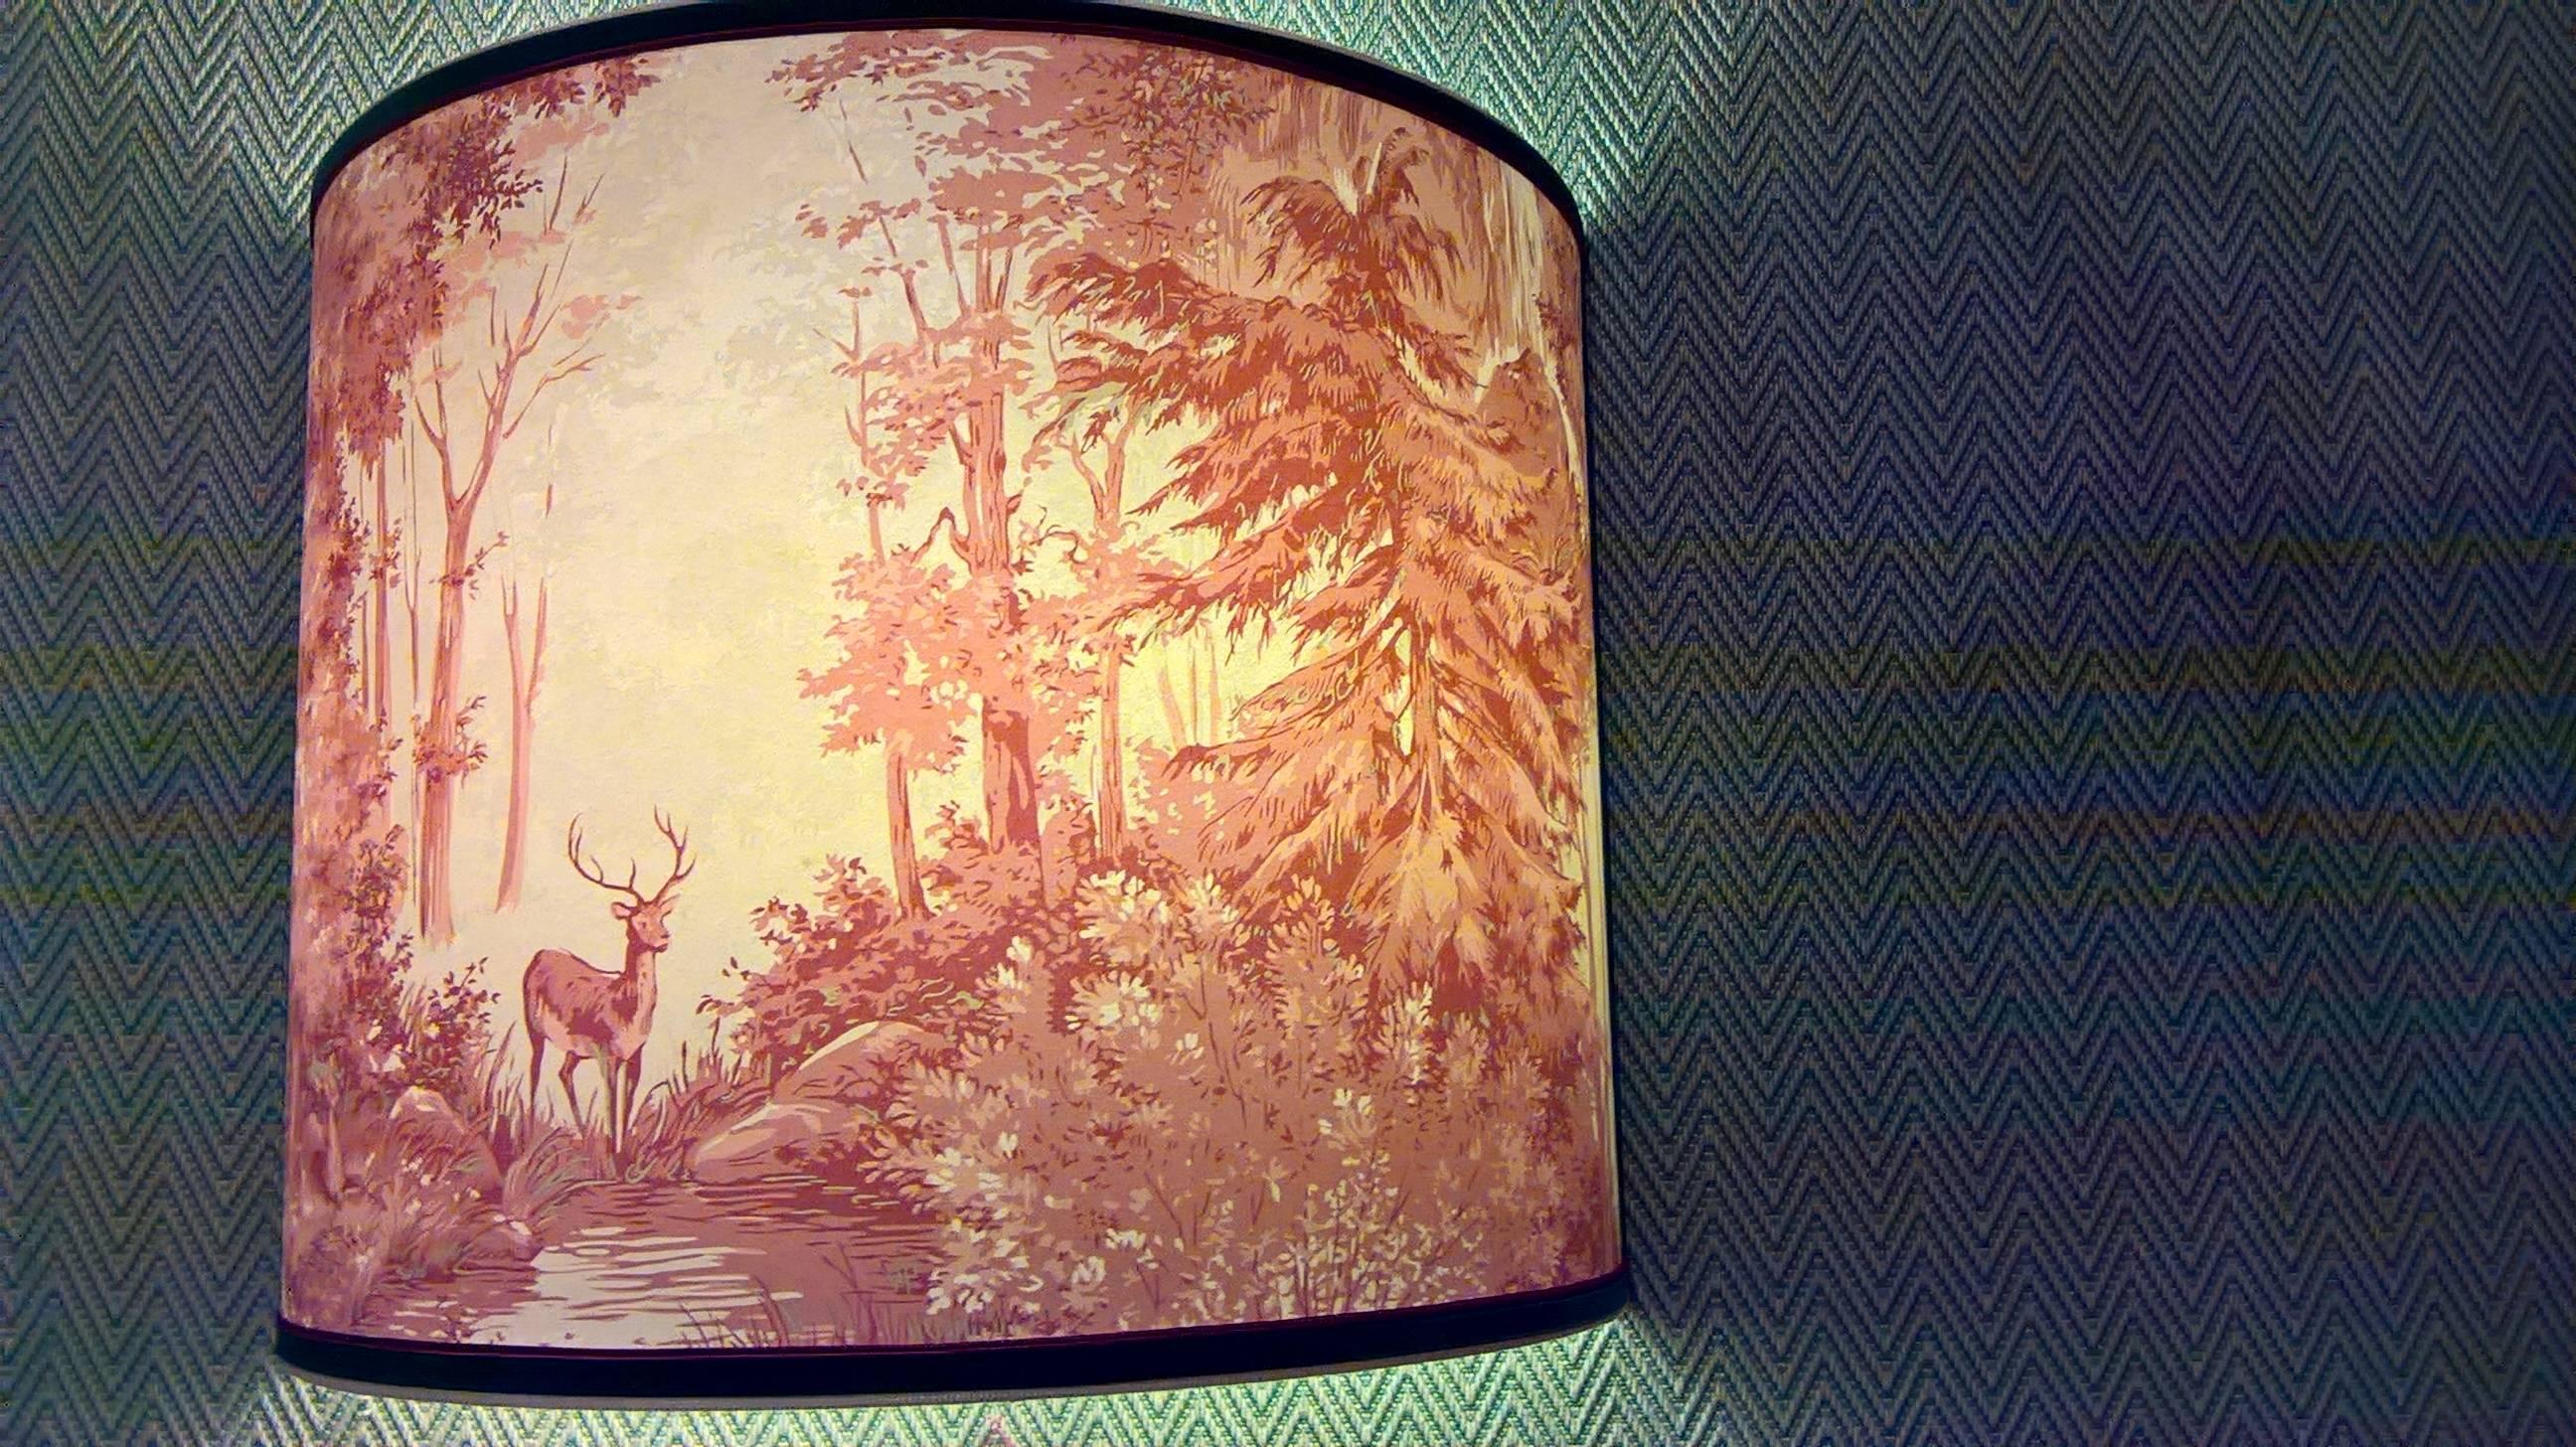 Large handmade lampshade made of wallpaper with a hunting scene in red and beige. 
Fixed with green and red paspol. Two handmade iron angles to supply electricity will be delivered with the shades. See last picture.
To be used as wall light